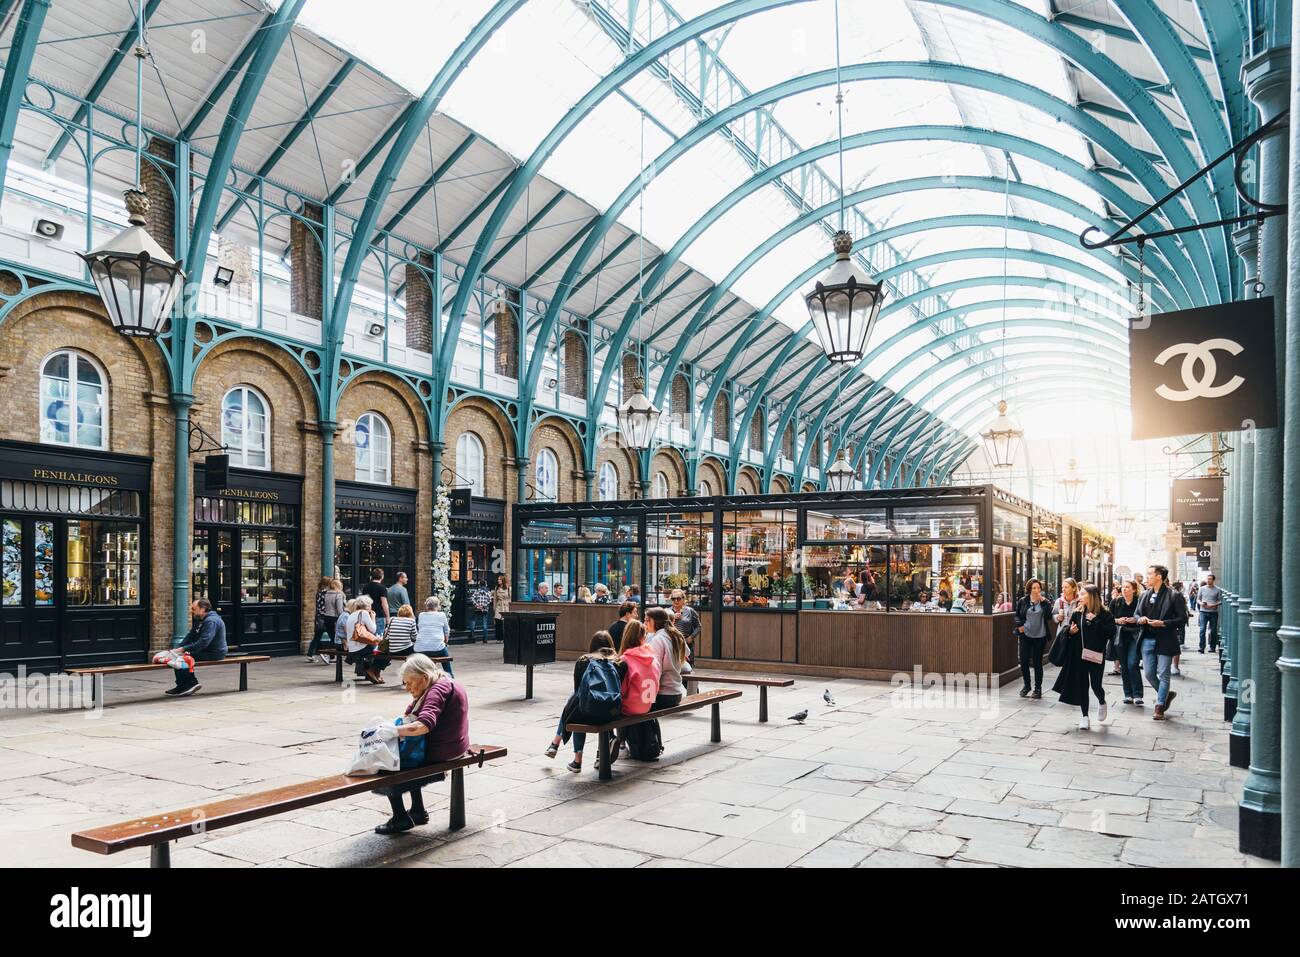 London, UK - May 15, 2019: People enjoying in Covent Garden Market, view with sunflare. Located in the West End of London, Covent Garden is renowned f Stock Photo